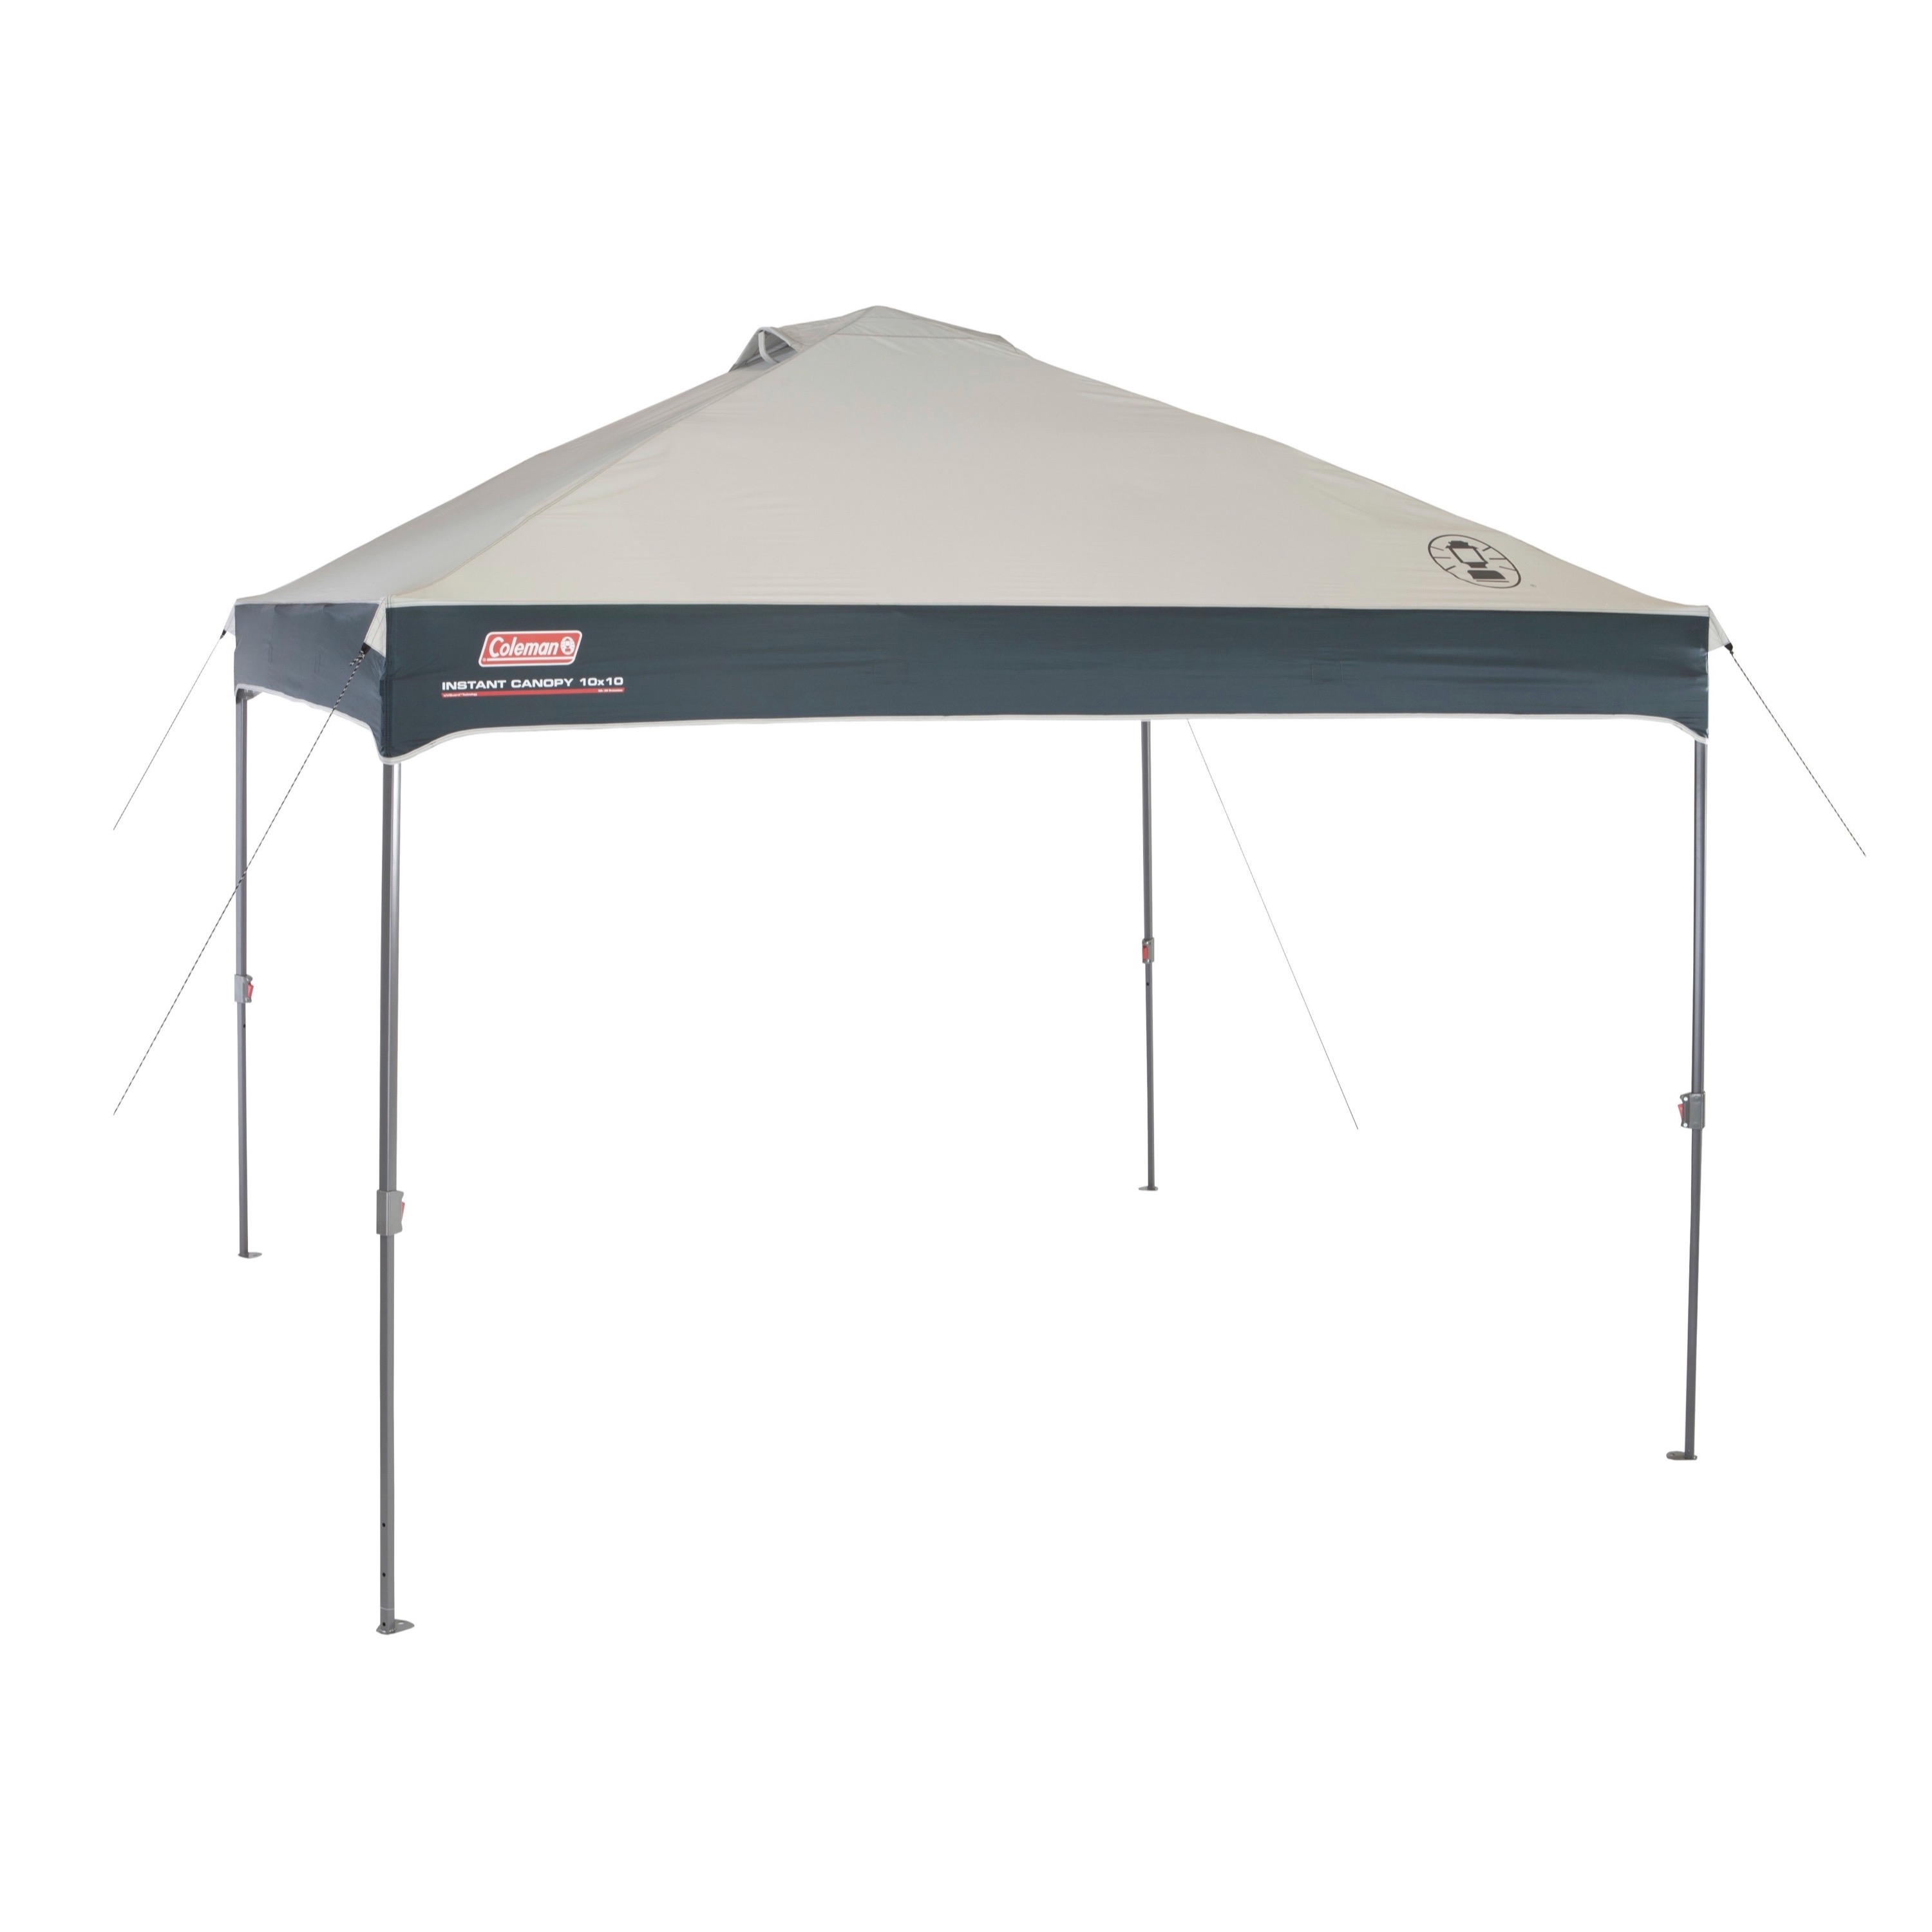 Coleman Straight Leg Instant Outdoor Canopy Shelter, 10 x 10, Tan & Black - image 1 of 10